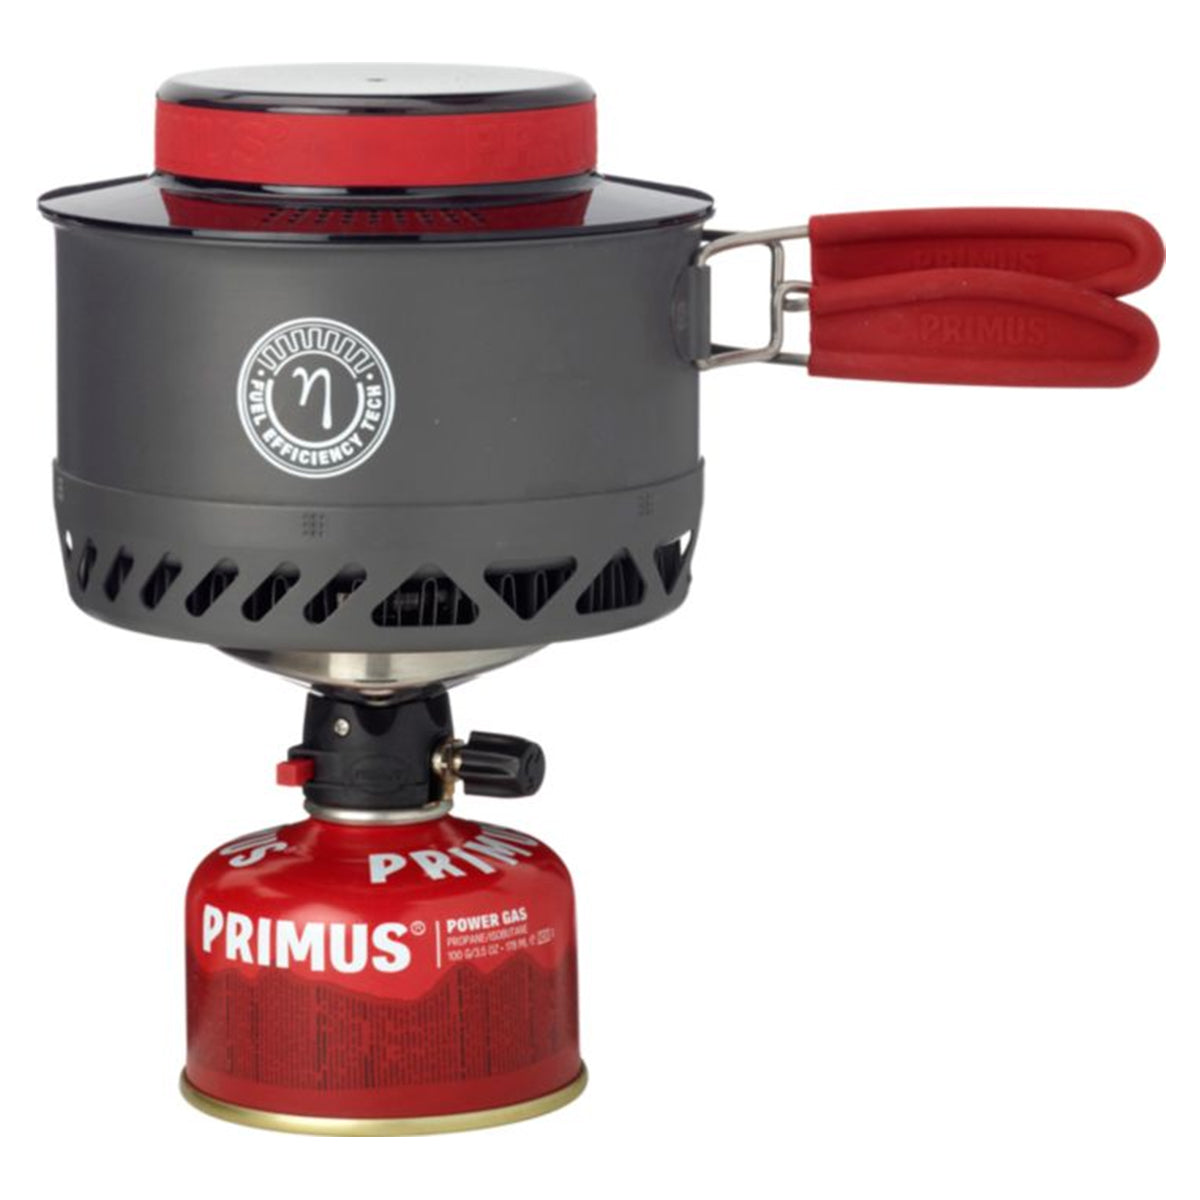 Primus Lite XL Stove System in Primus Lite XL Stove System by Primus | Camping - goHUNT Shop by GOHUNT | Primus - GOHUNT Shop